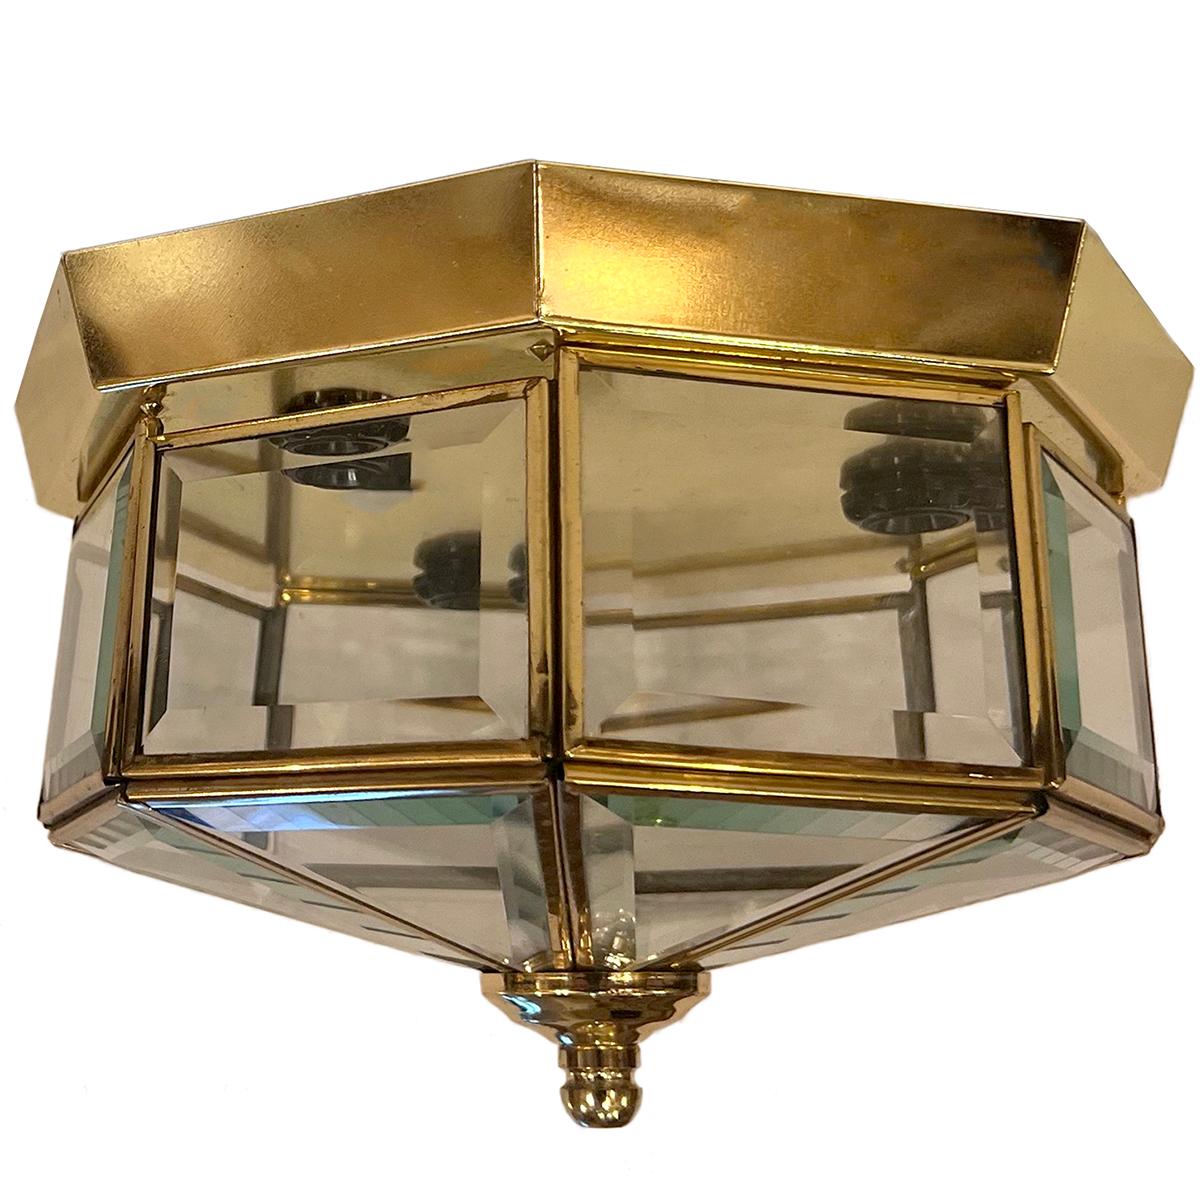 A circa 1960's Italian light fixture with beveled glass. 3 interior candelabra lights. 

Measurements:
Height: 5.5